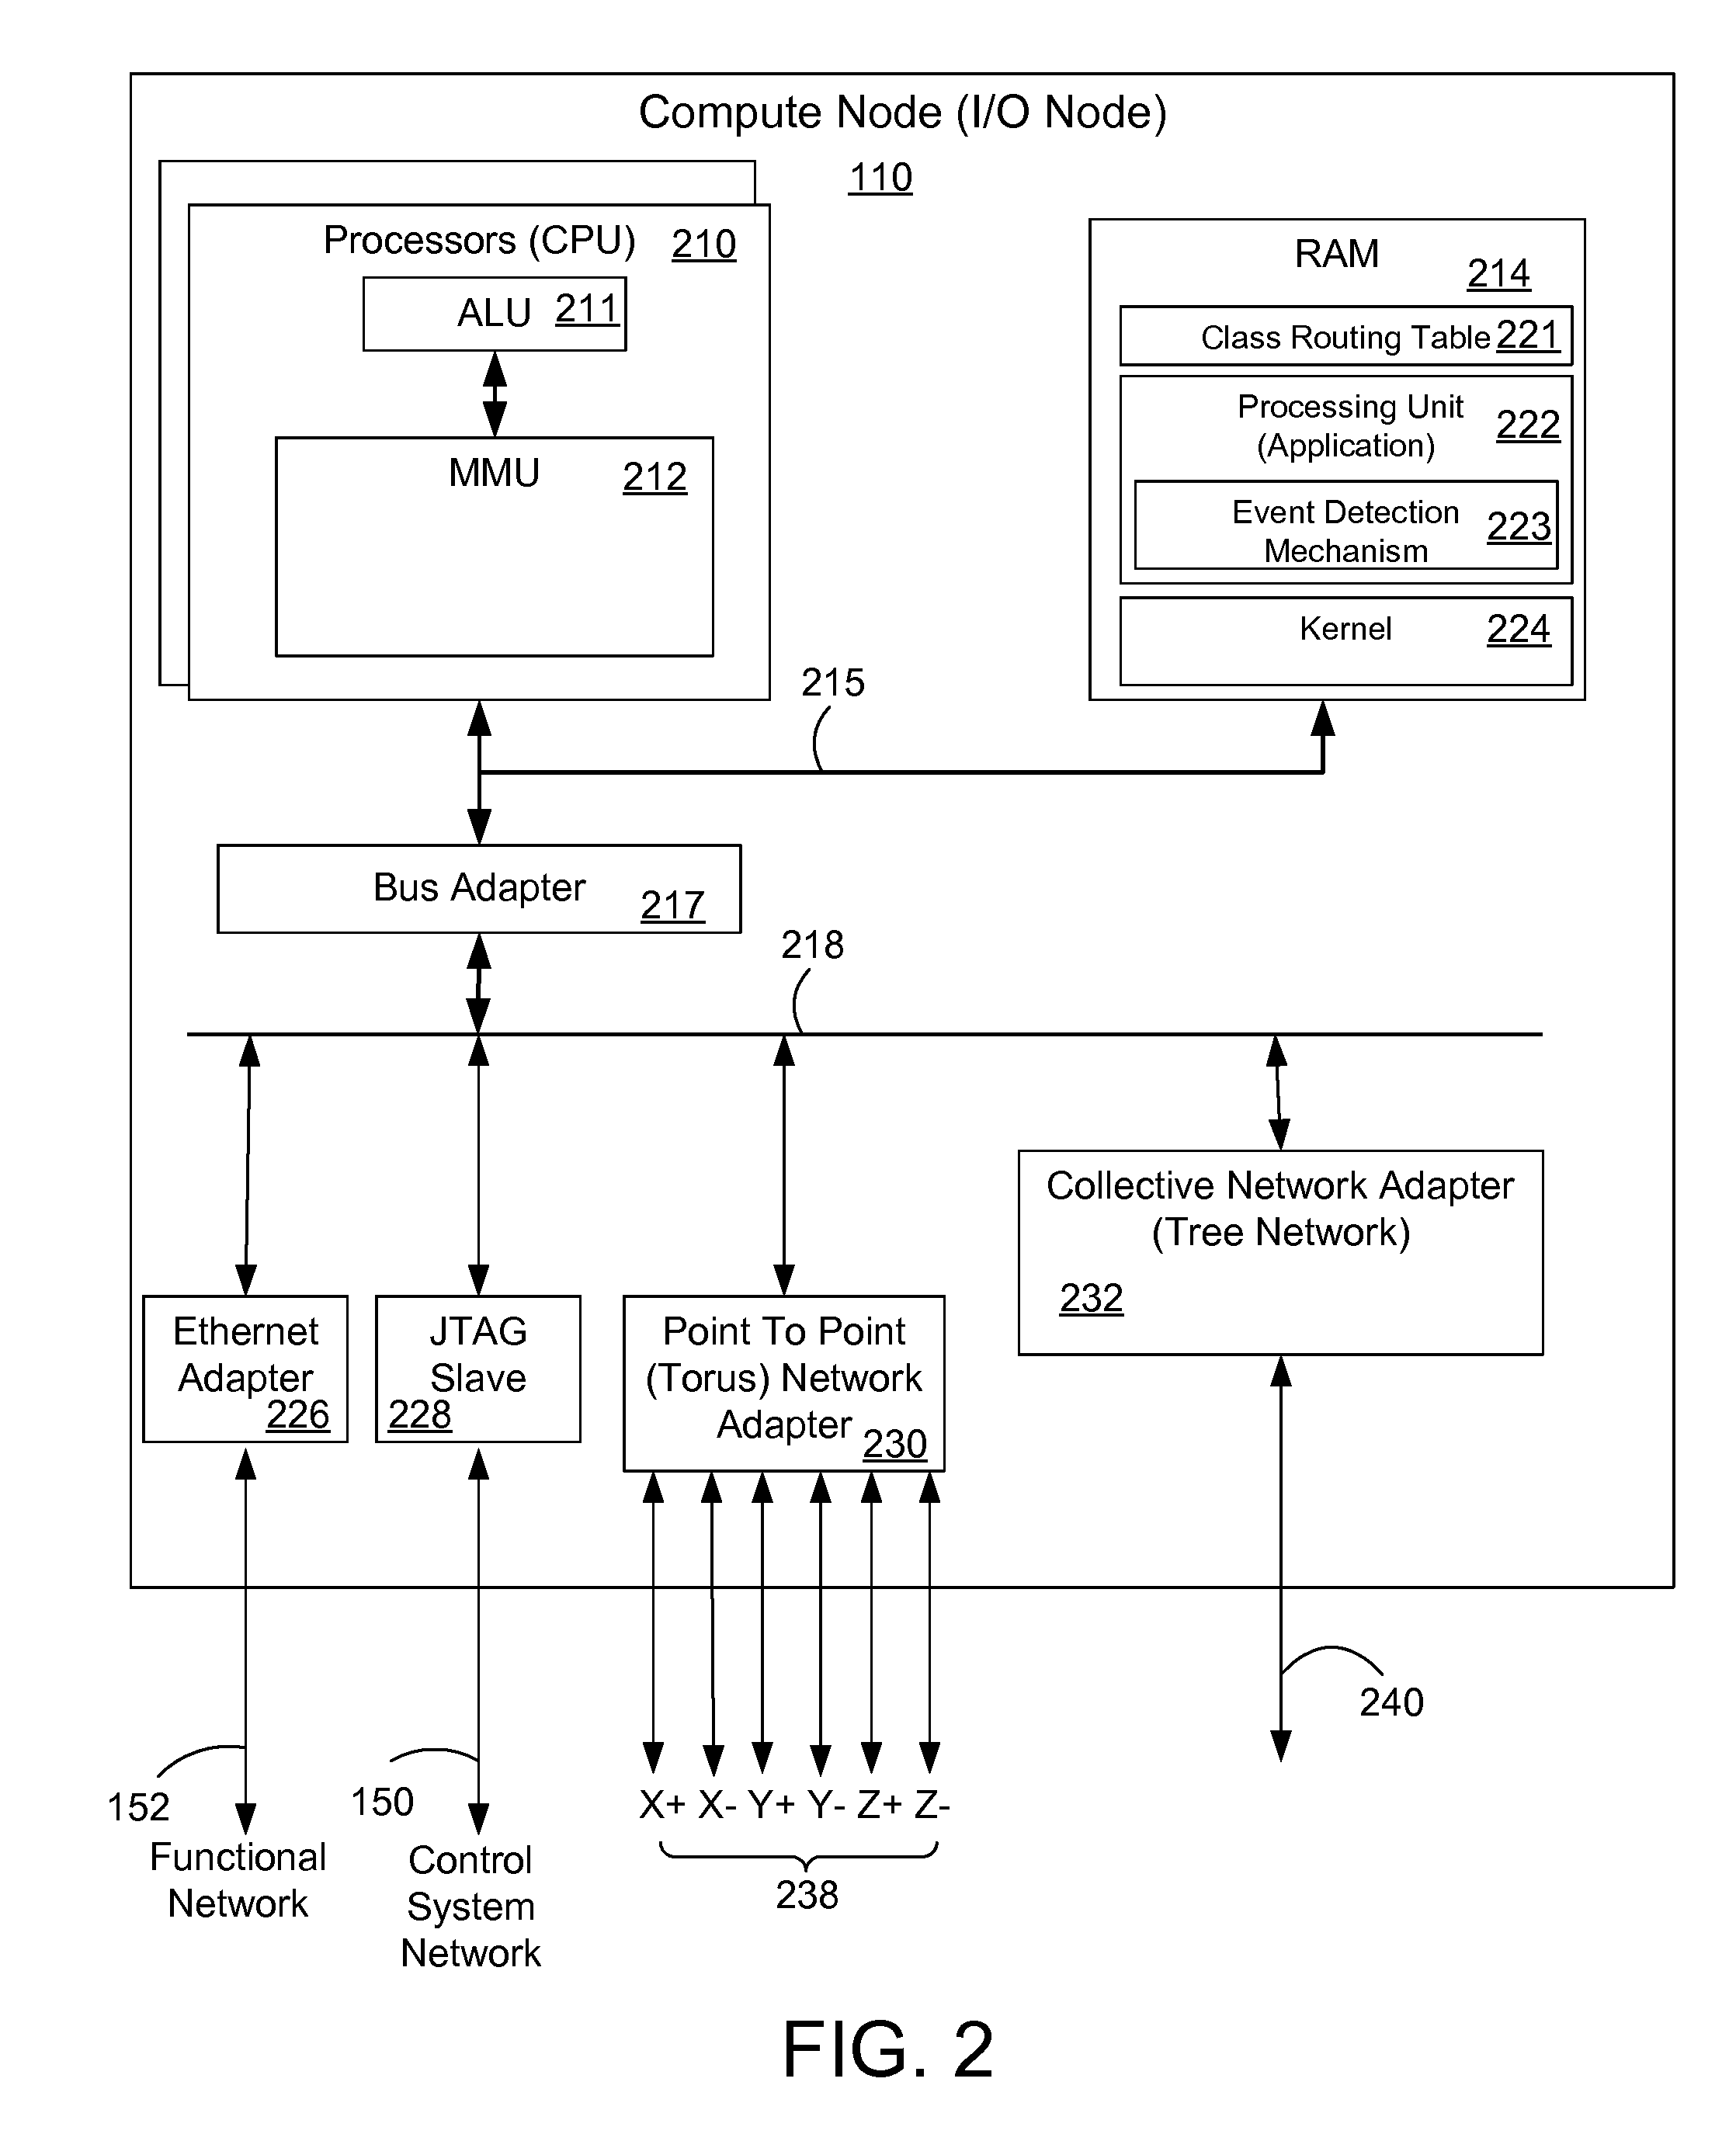 Dynamic resource adjustment for a distributed process on a multi-node computer system